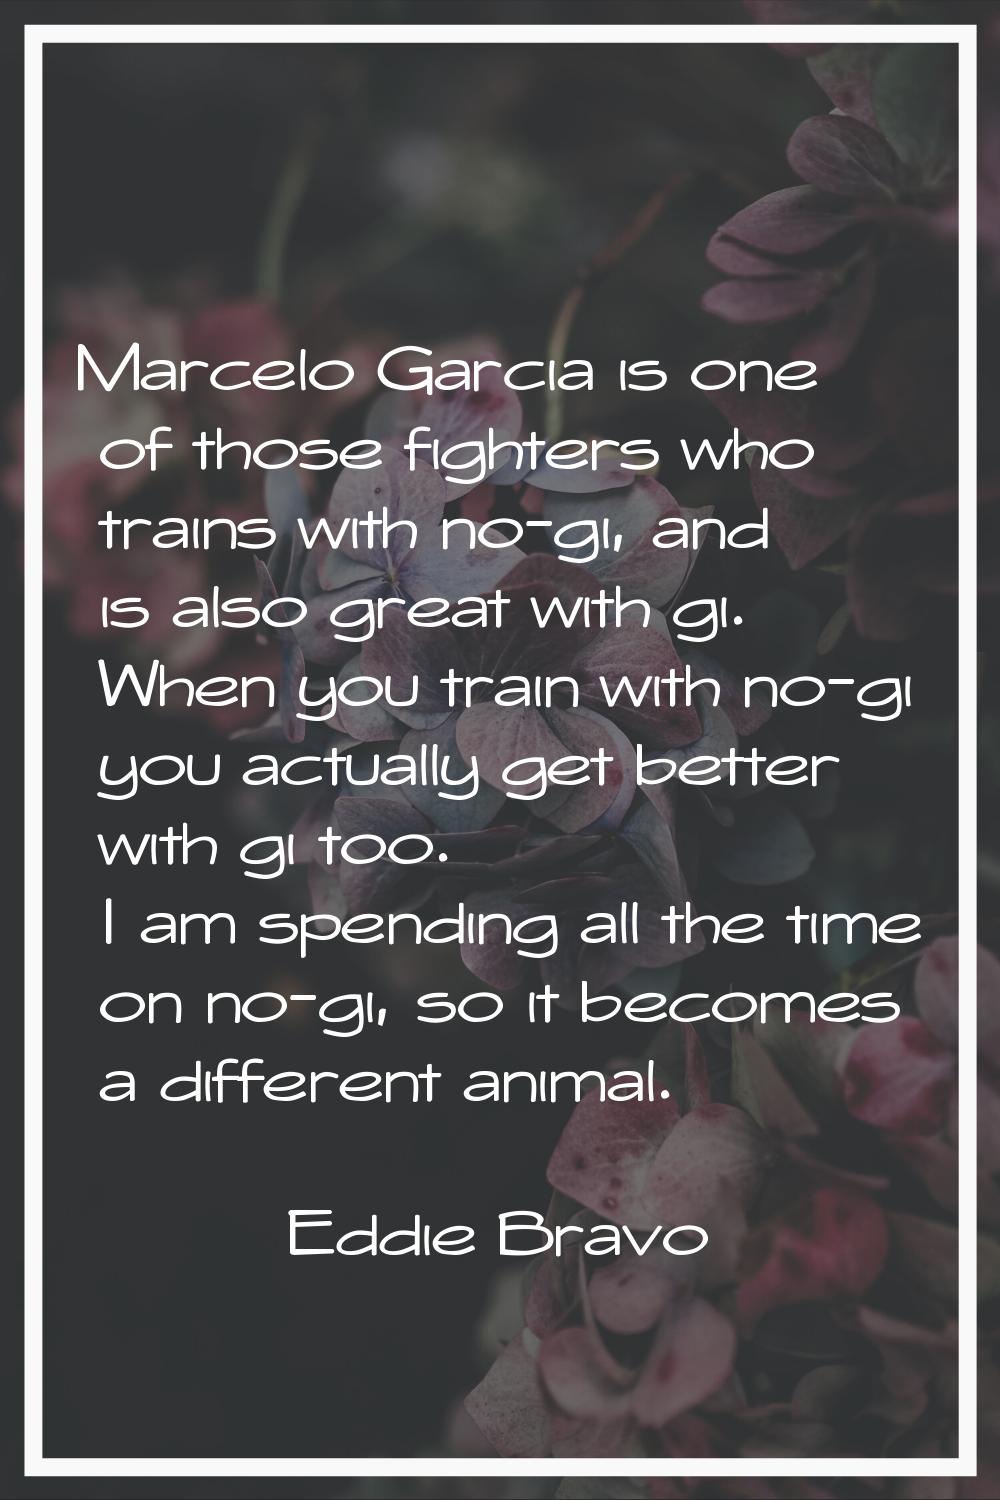 Marcelo Garcia is one of those fighters who trains with no-gi, and is also great with gi. When you 